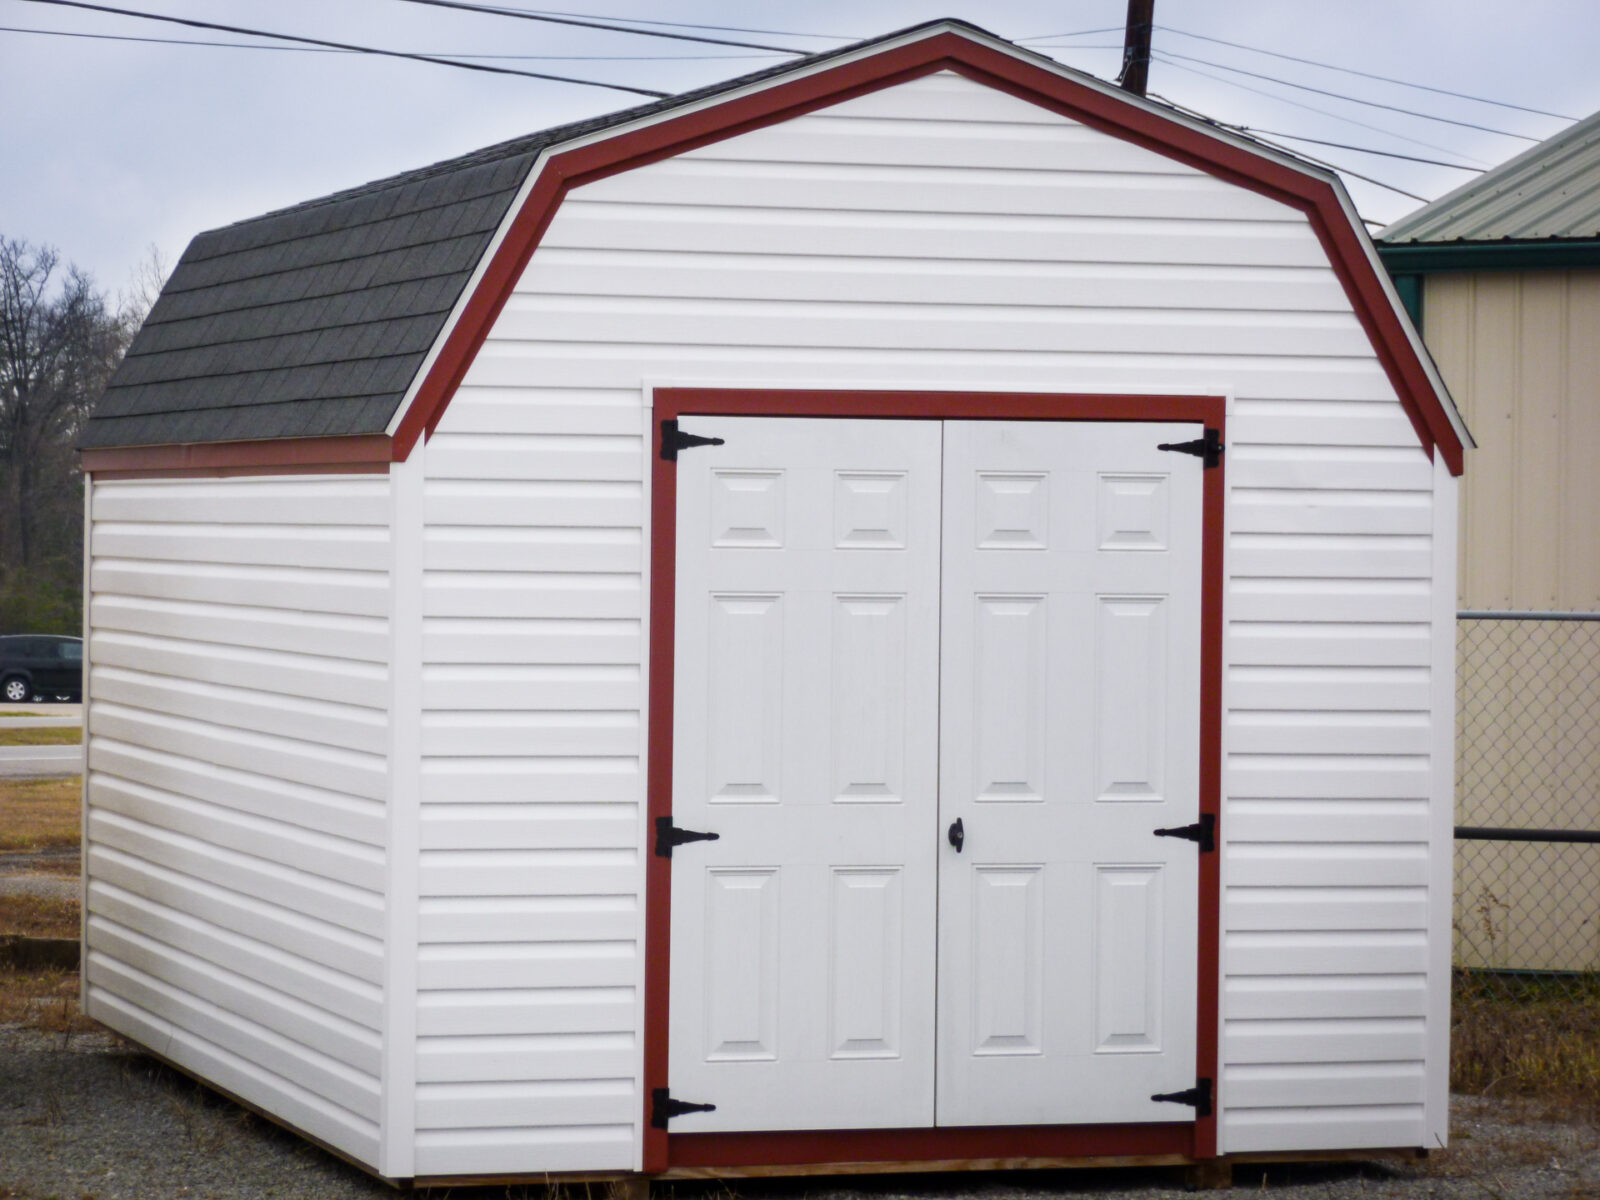 A storage building in Kentucky with vinyl siding and double doors